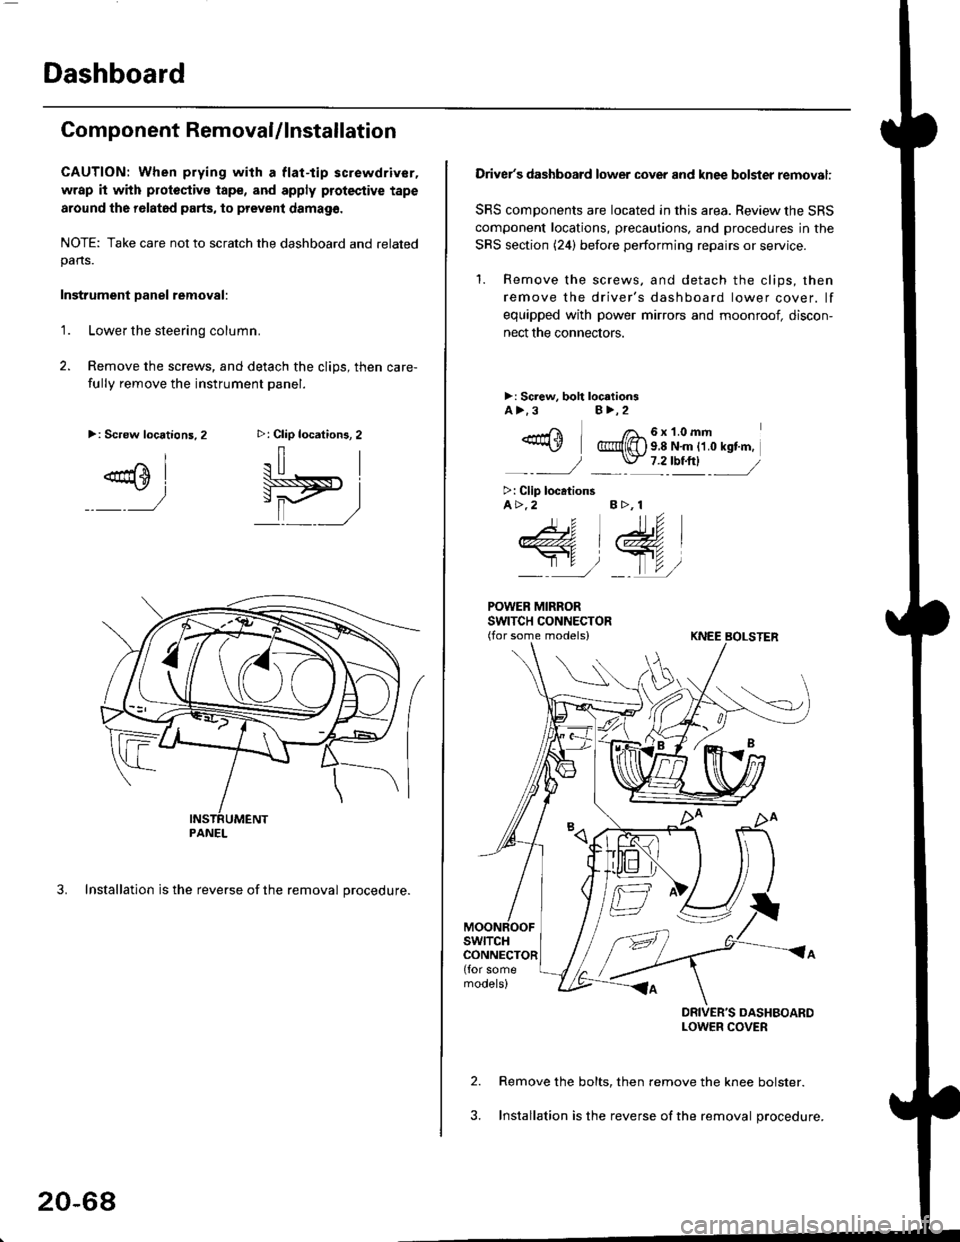 HONDA CIVIC 1996 6.G Service Manual Dashboard
Component RemovaUlnstallation
CAUTION: When prying with a flat-tip screwdriver,
wrap it with protoctivo tape, and apply protective tape
around tho r6lat6d parts, to prevent damag6.
NOTE: Tak